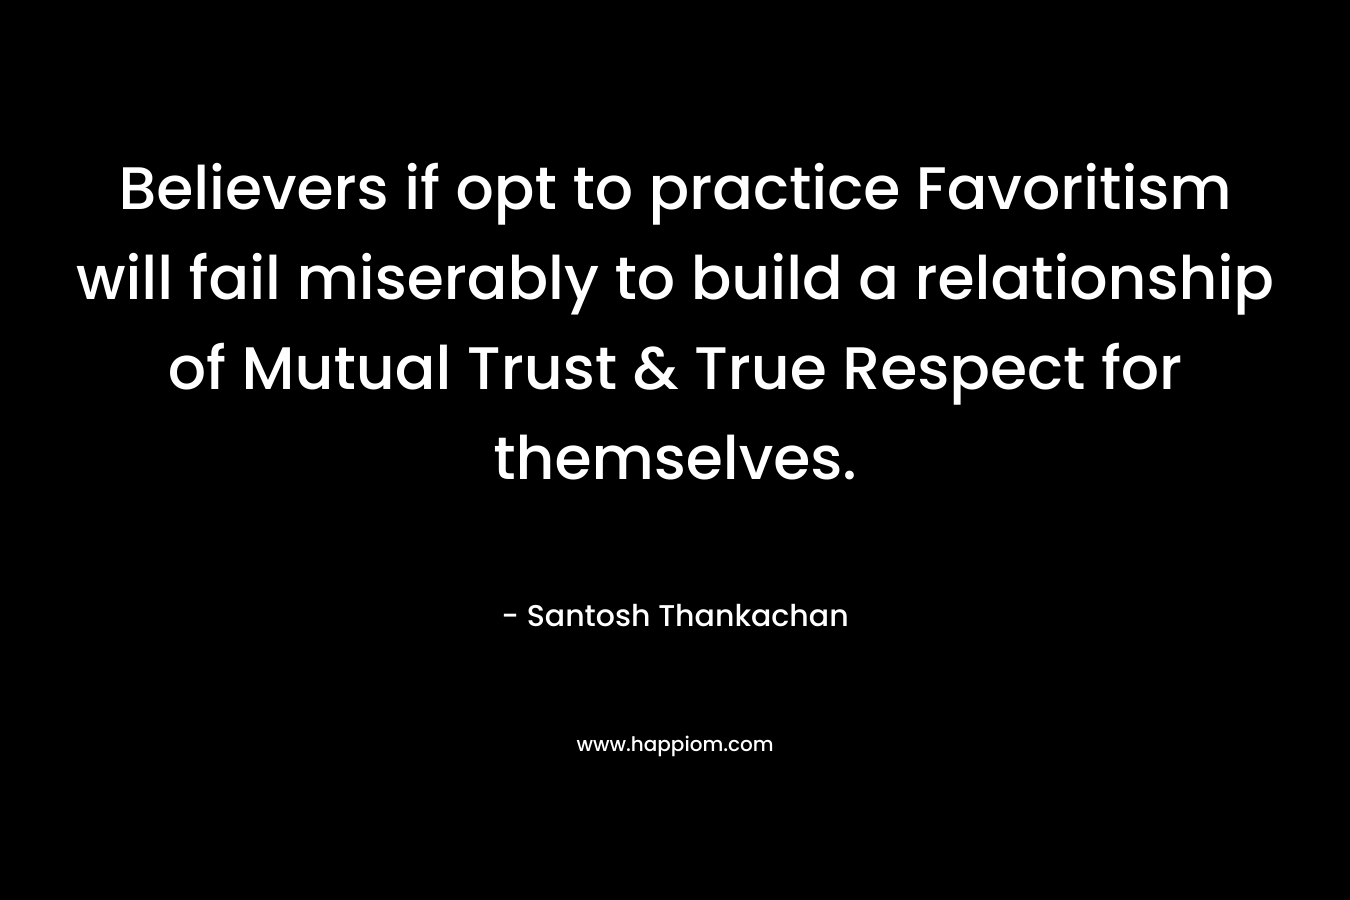 Believers if opt to practice Favoritism will fail miserably to build a relationship of Mutual Trust & True Respect for themselves.